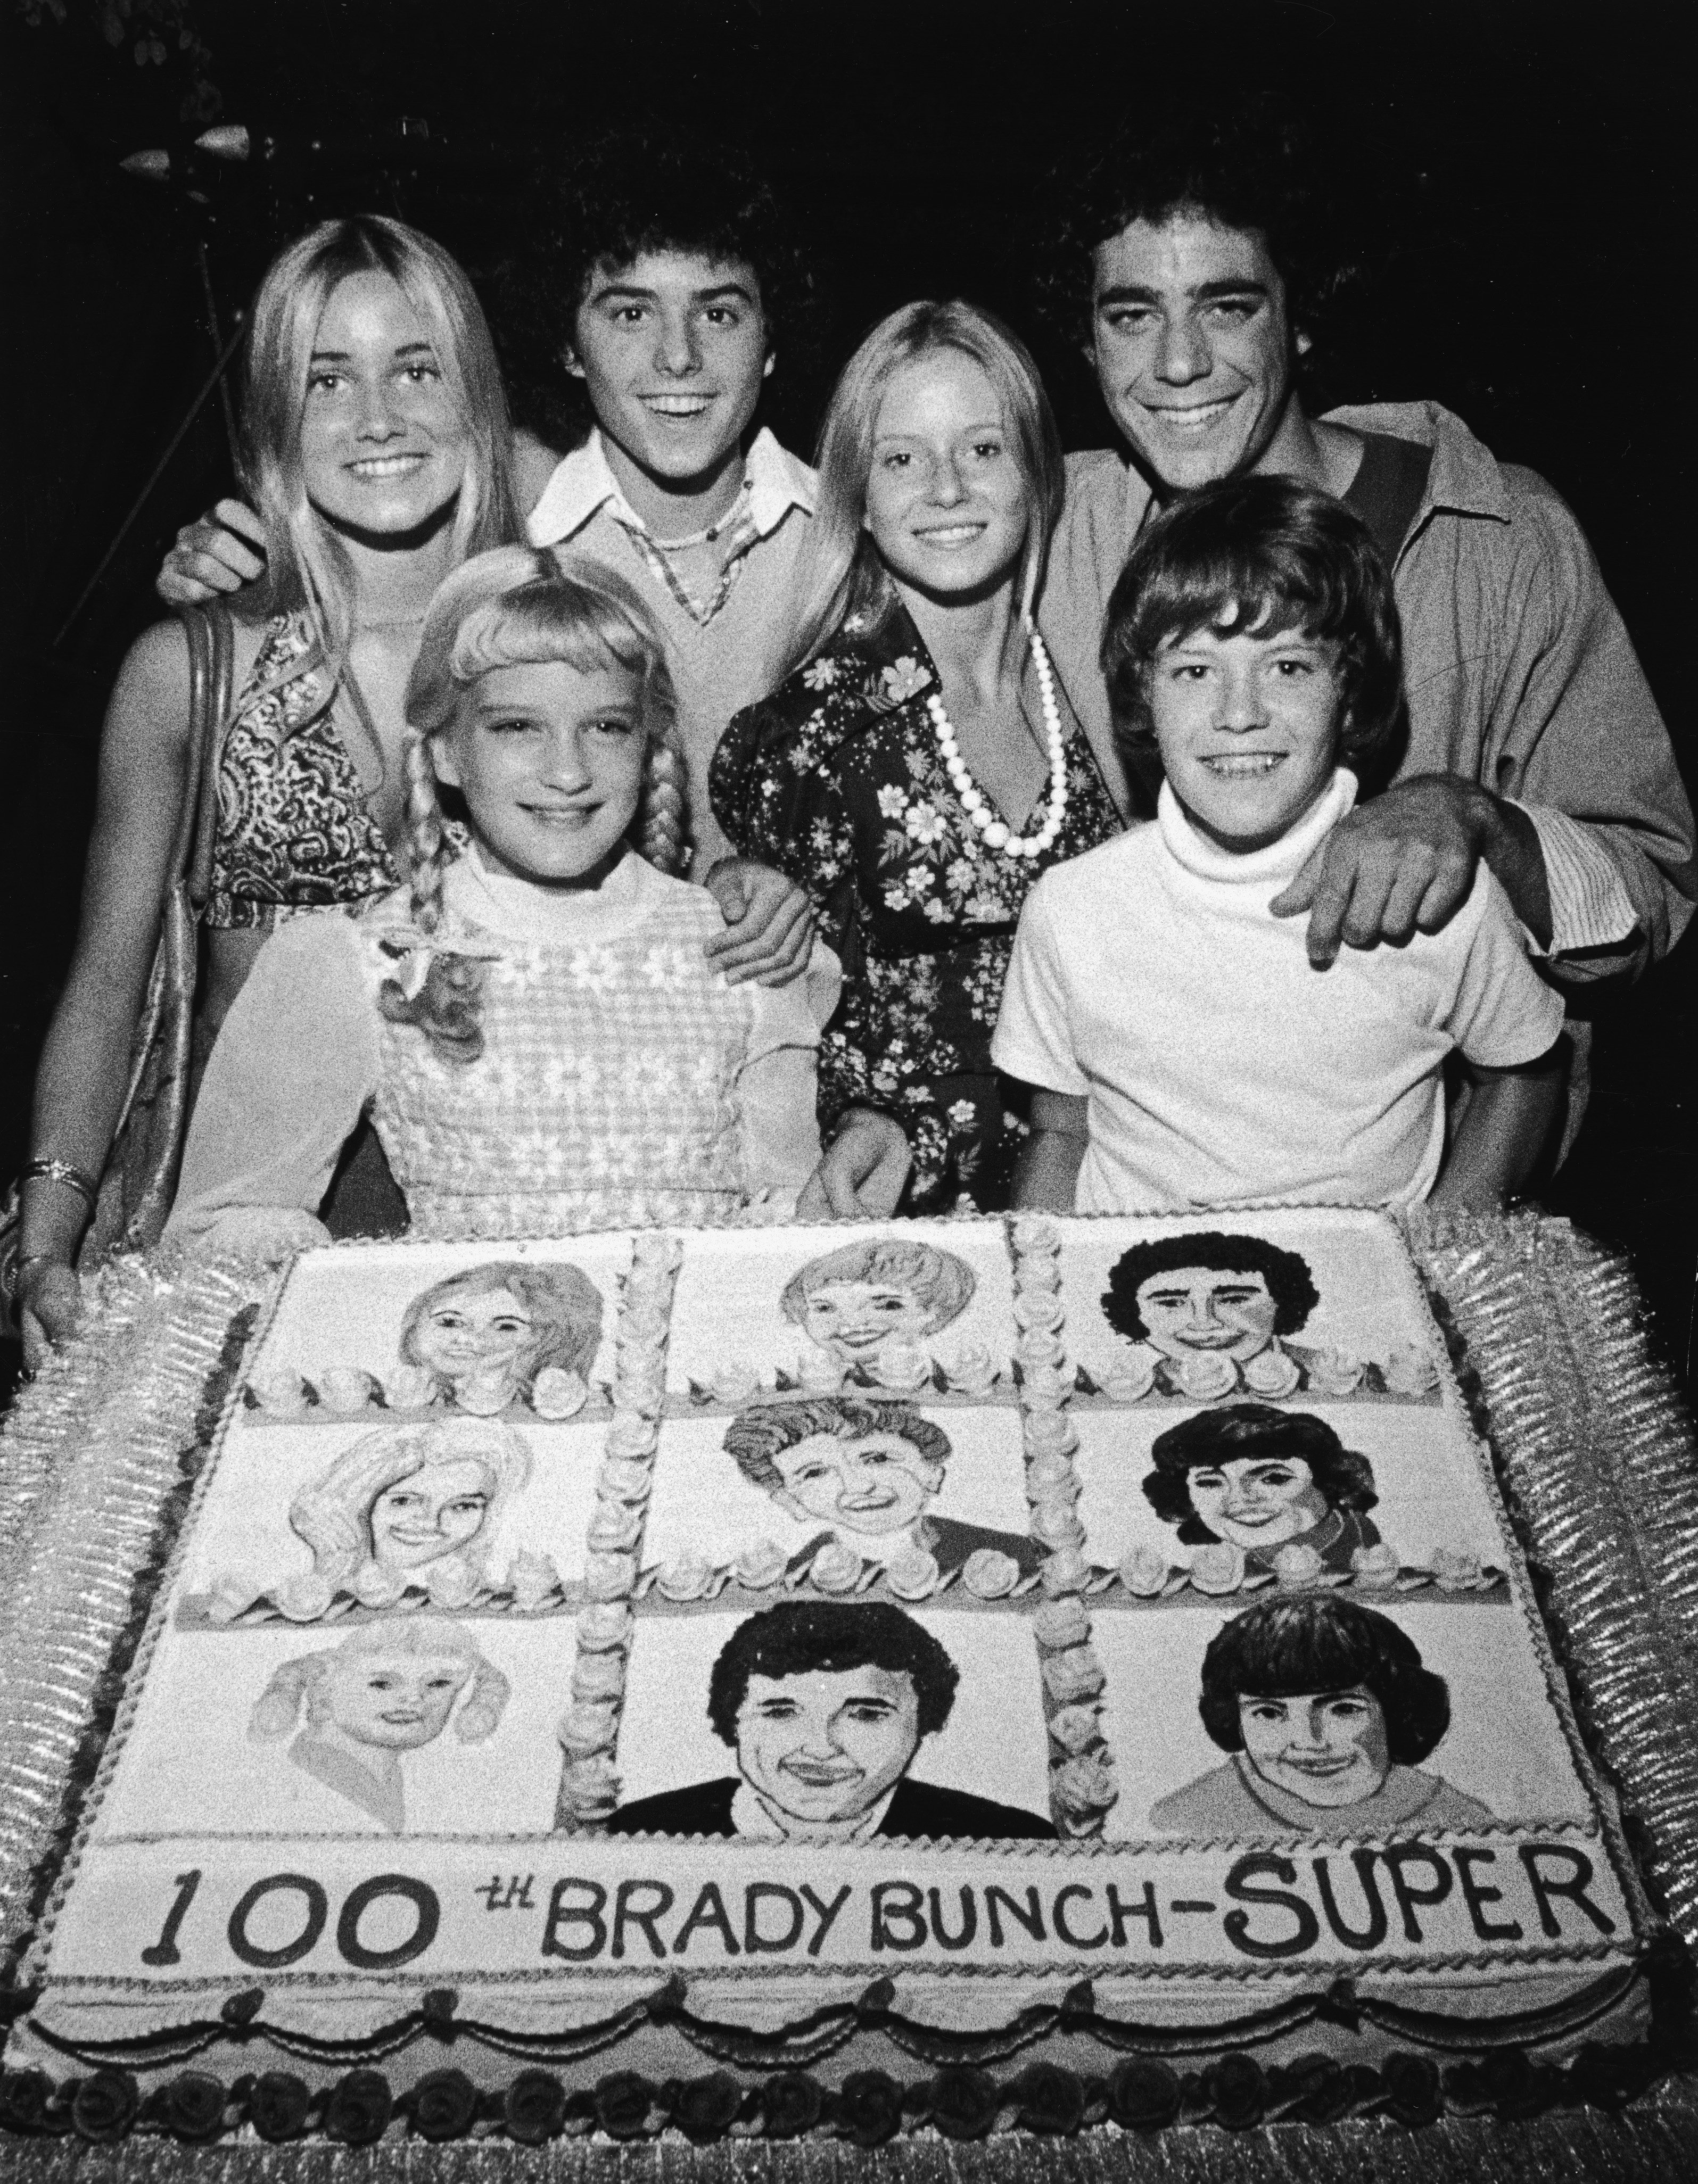 The young cast of "The Brady Bunch" pose with a cake celebrating the show's 100th episode. | Source: Getty Images 